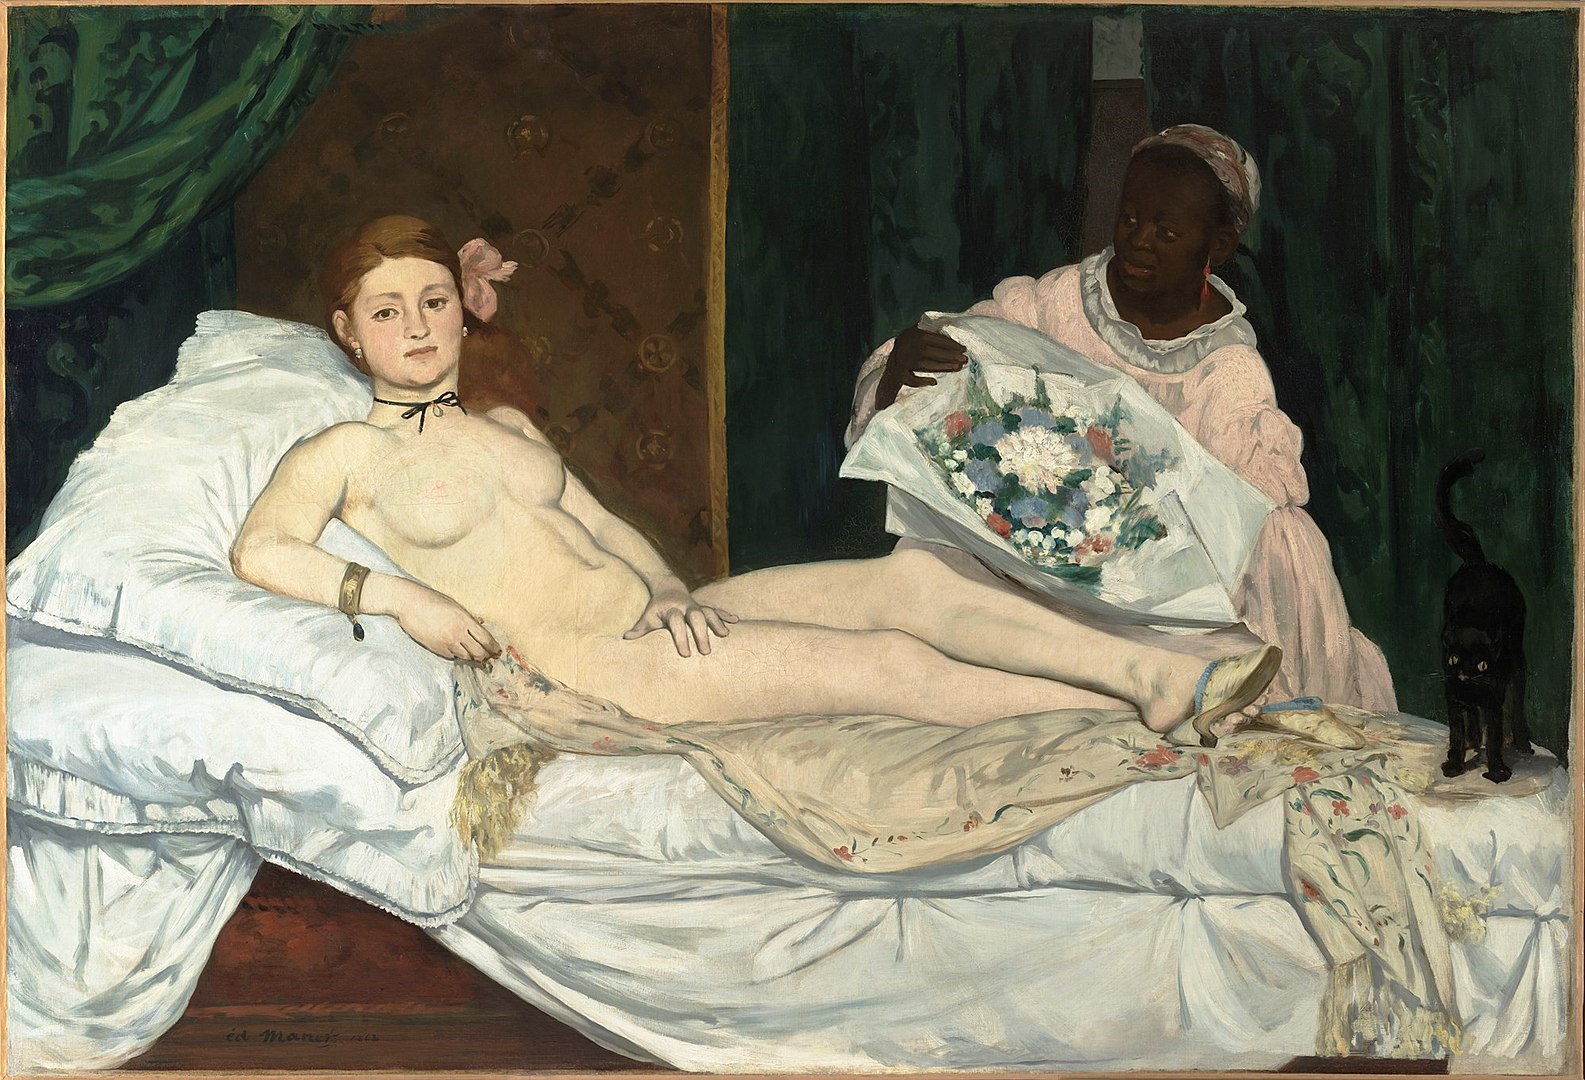 1863, Manet, Olympia, Musée_d'Orsay, WIKI